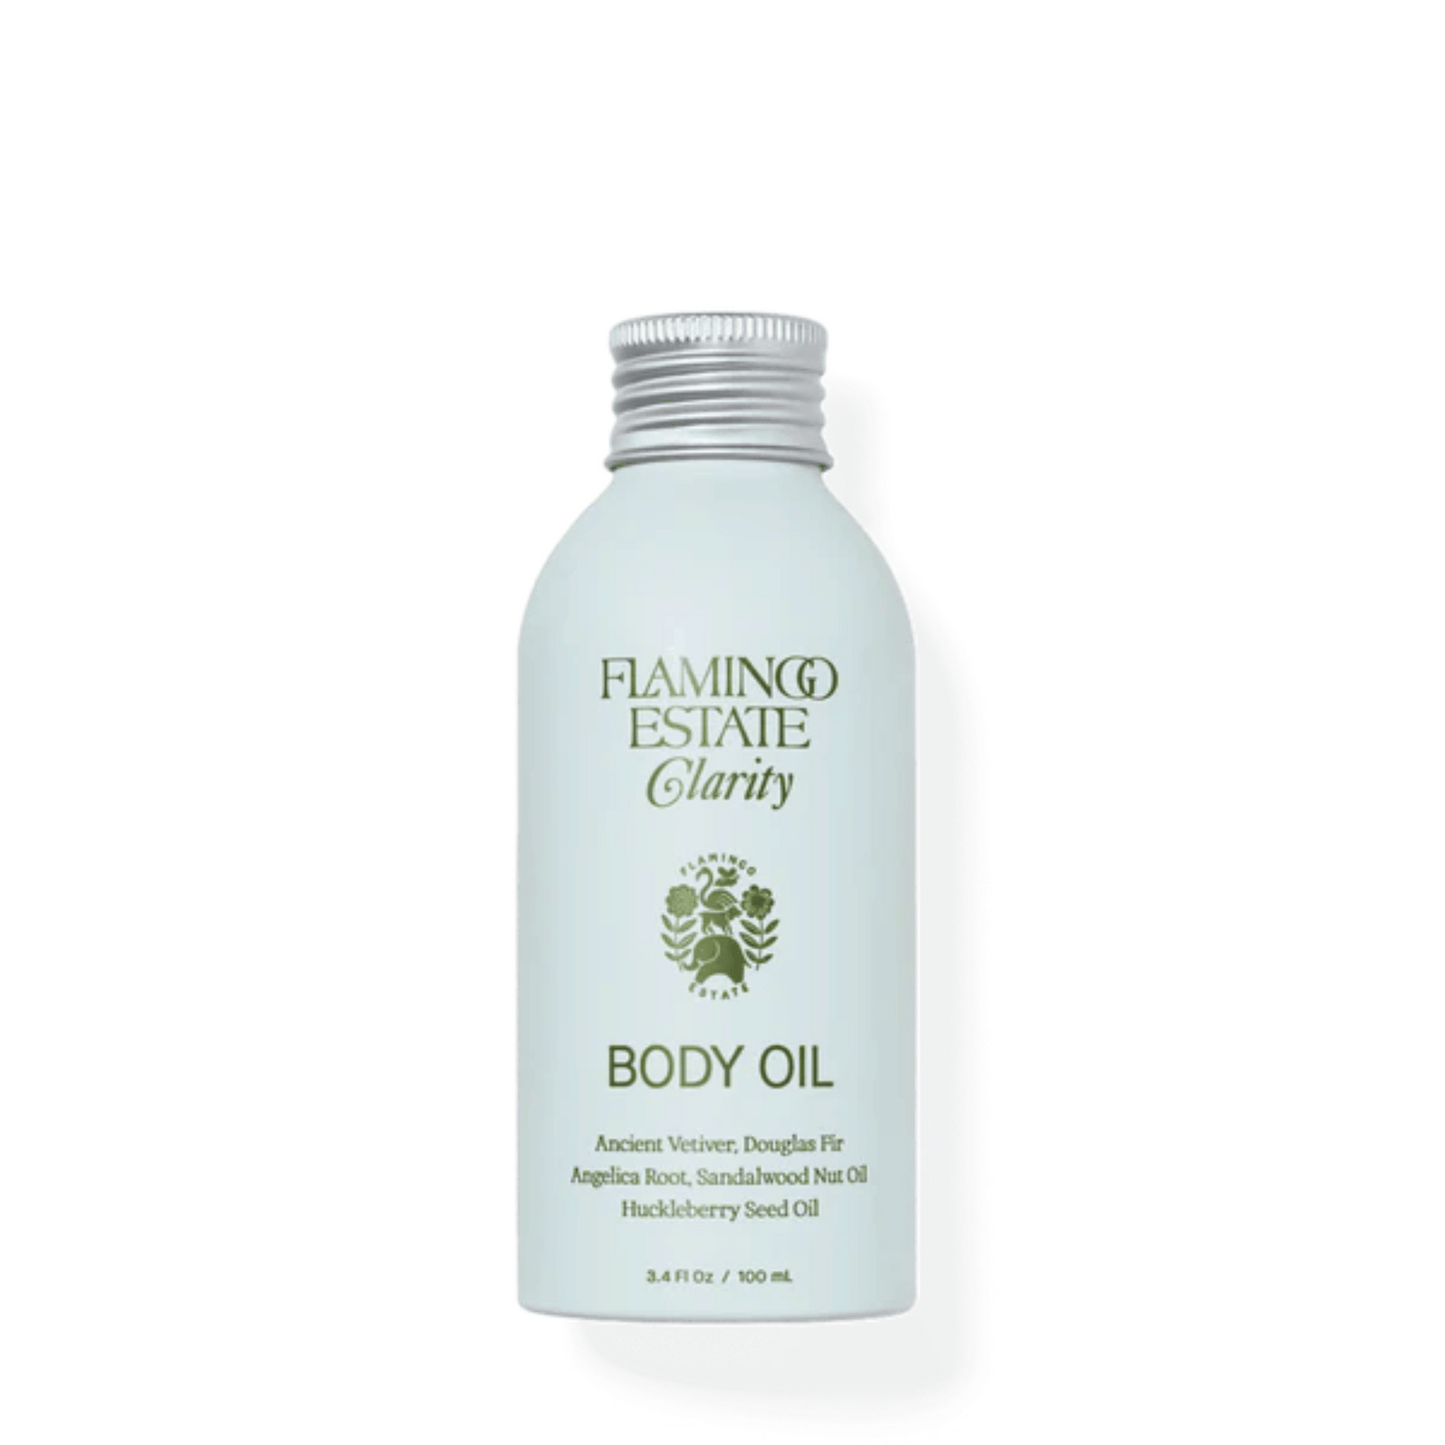 Primary Image of Clarity Body Oil